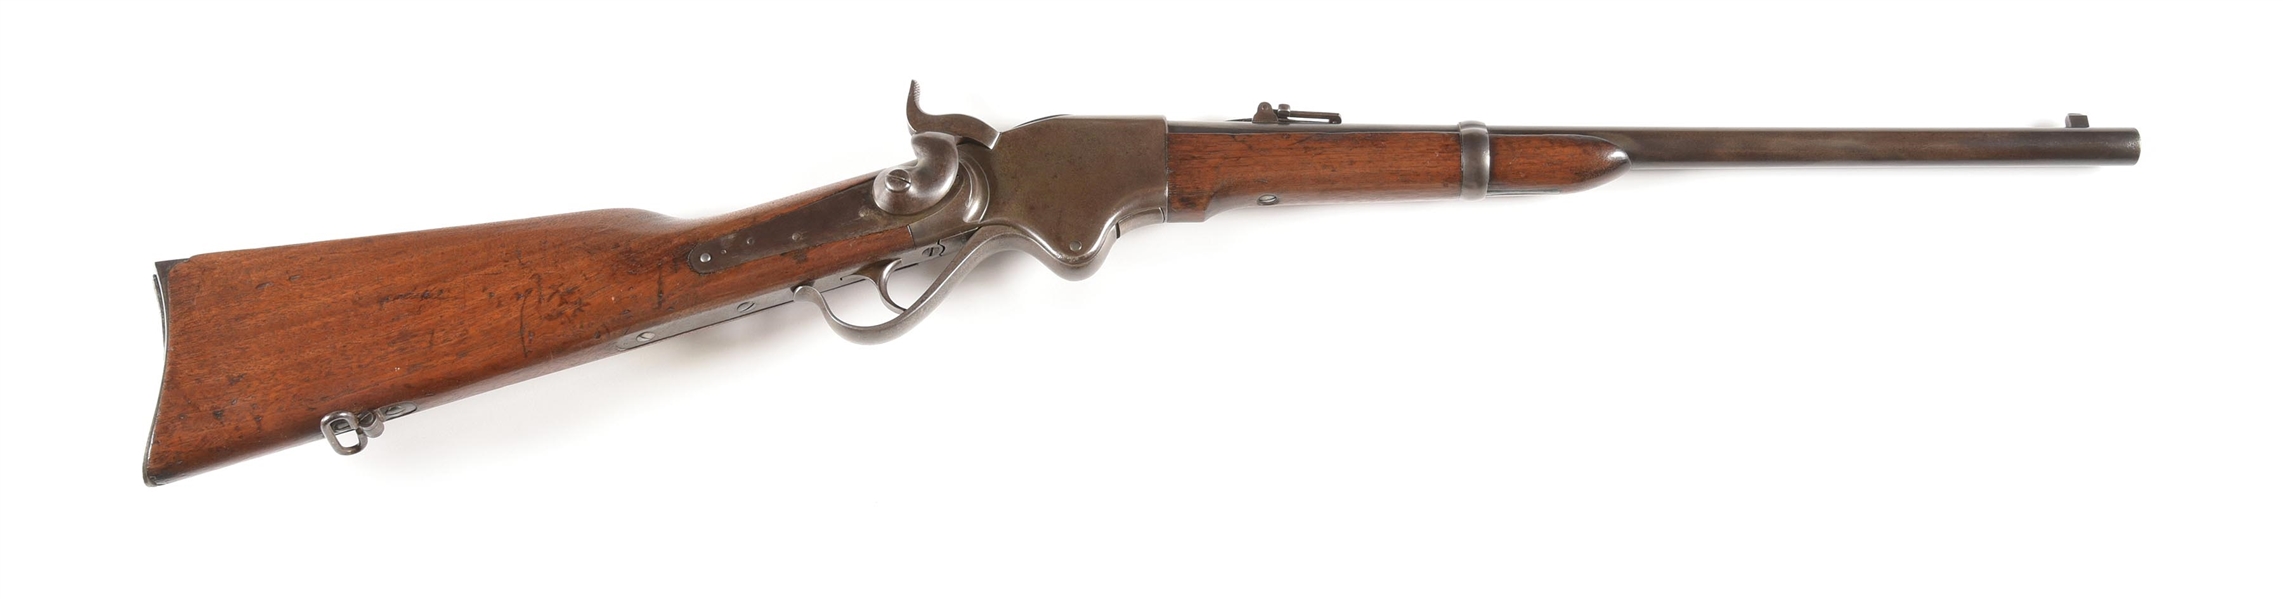 (A) BURNSIDE MADE SPENCER MODEL 1865 CONTRACT REPEATING CARBINE.